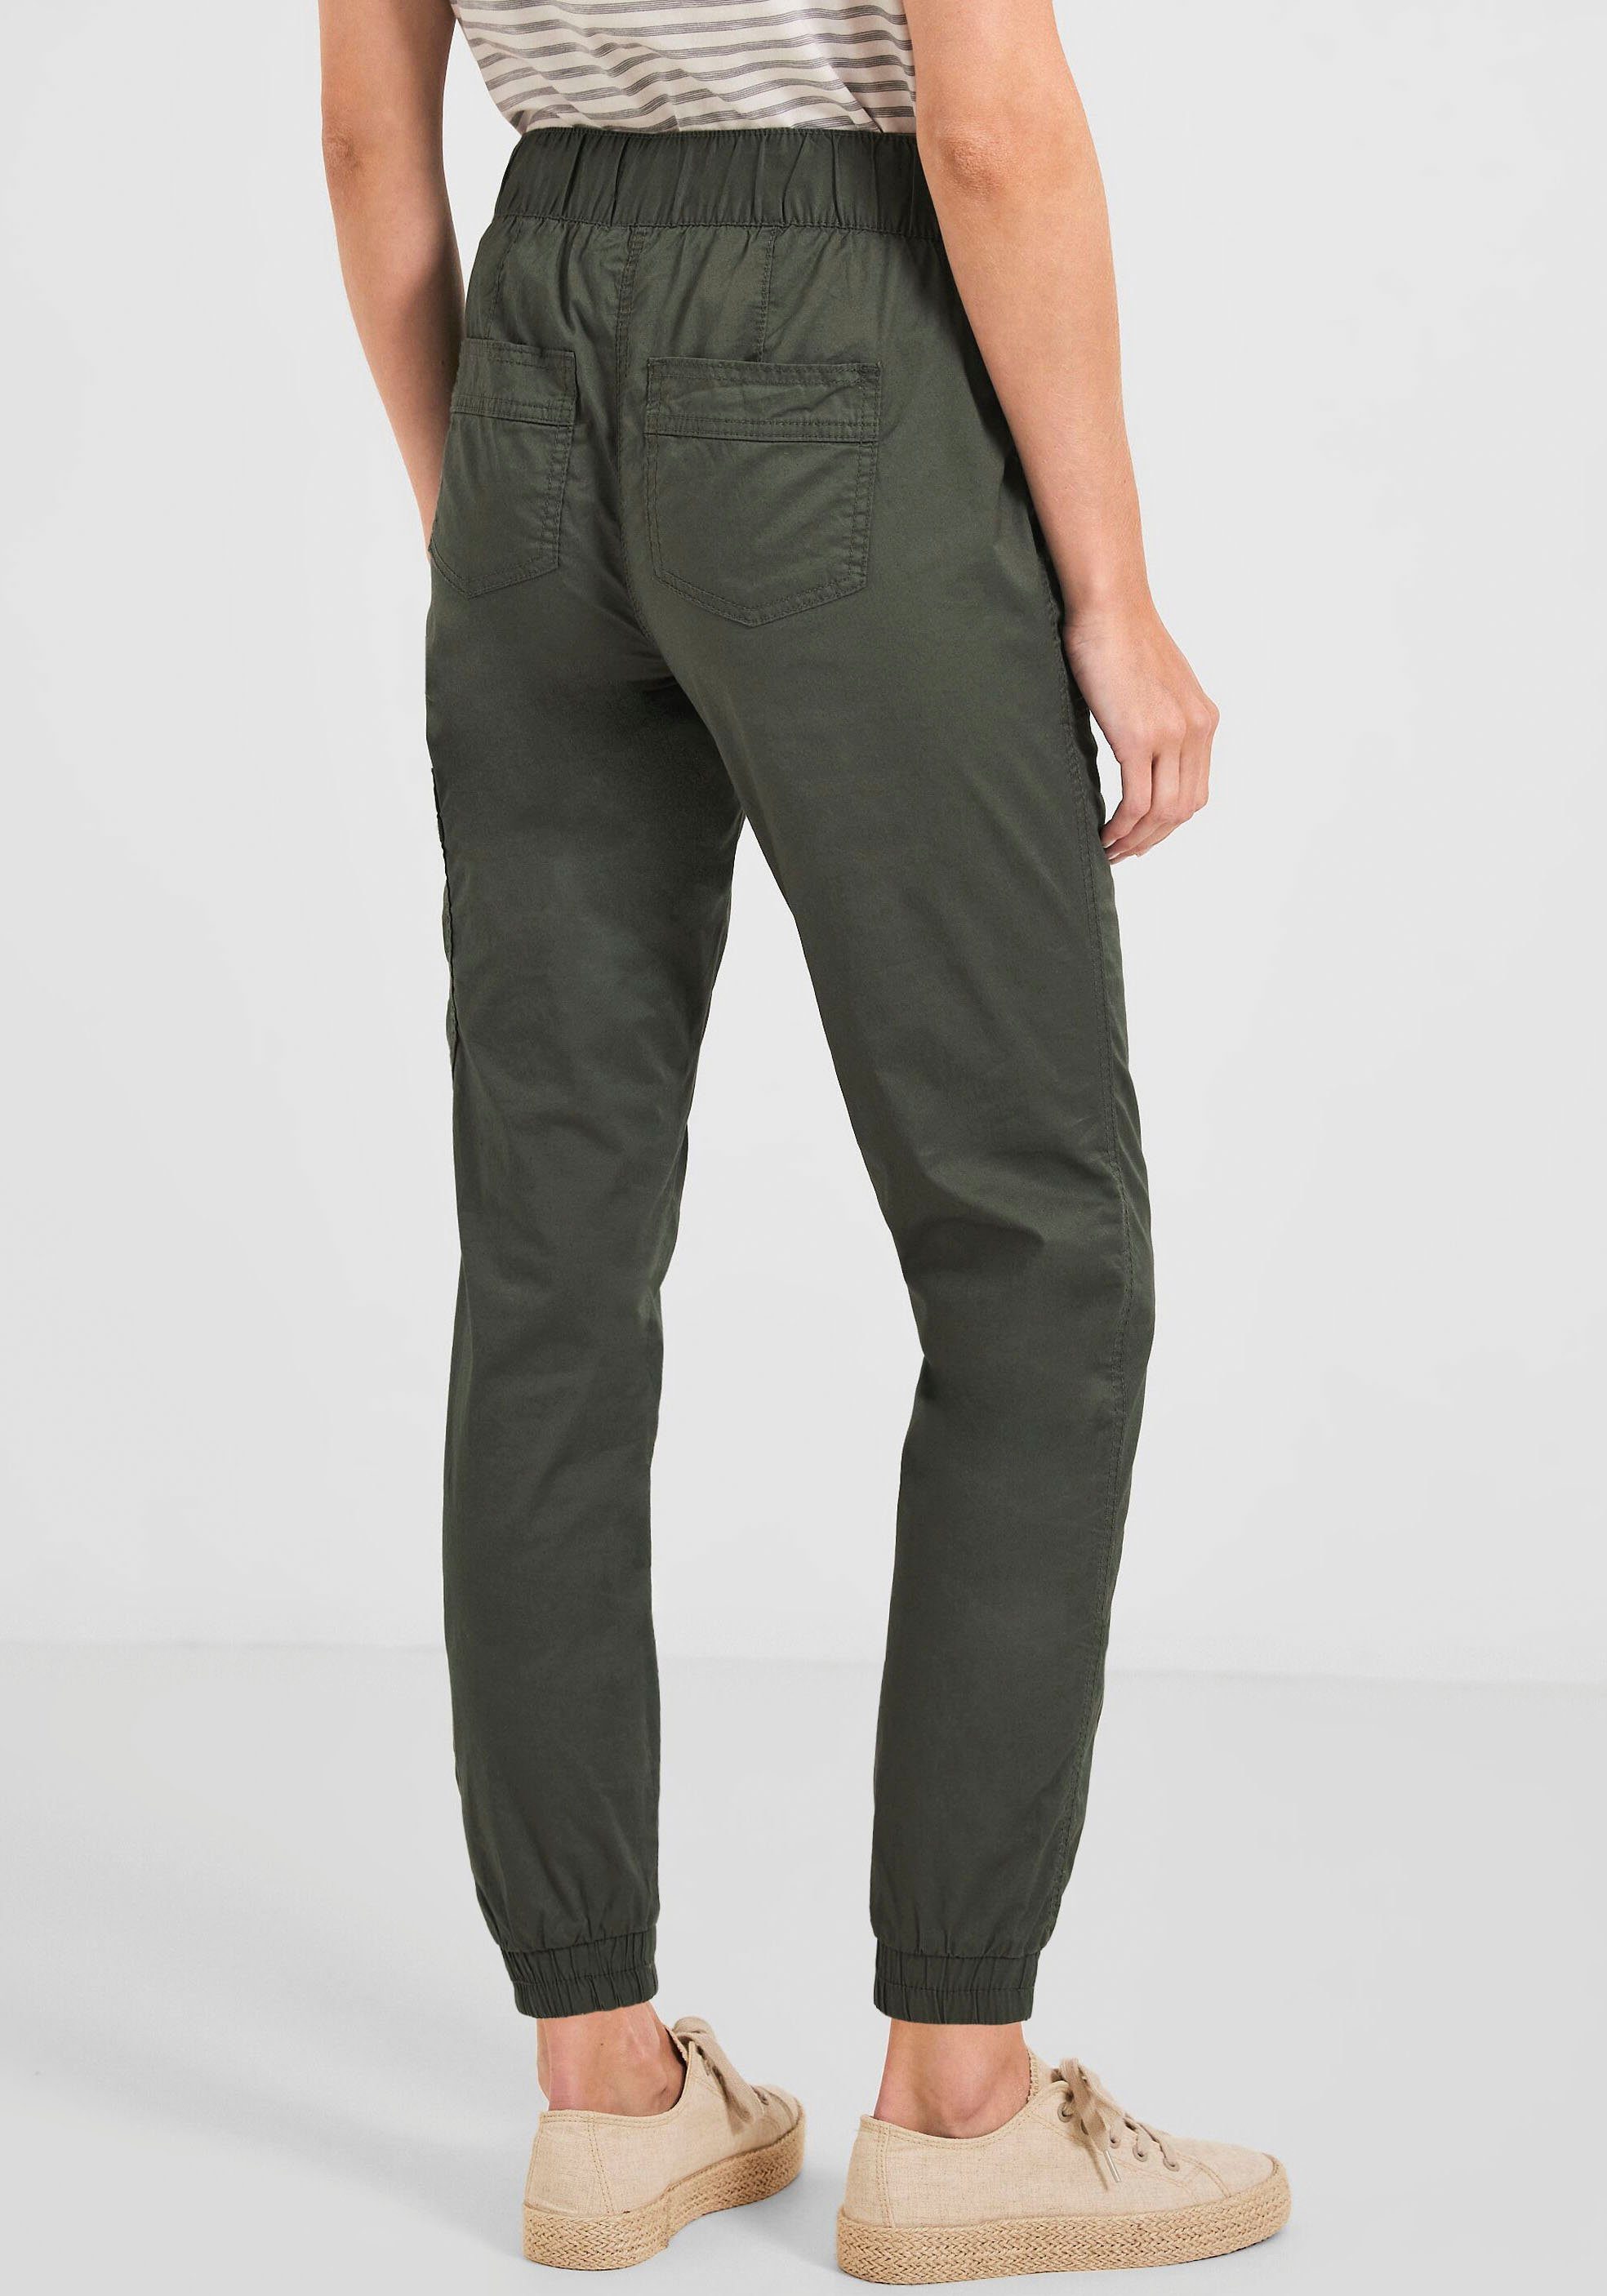 Cecil Outdoorhose im Style Tracey sporty khaki